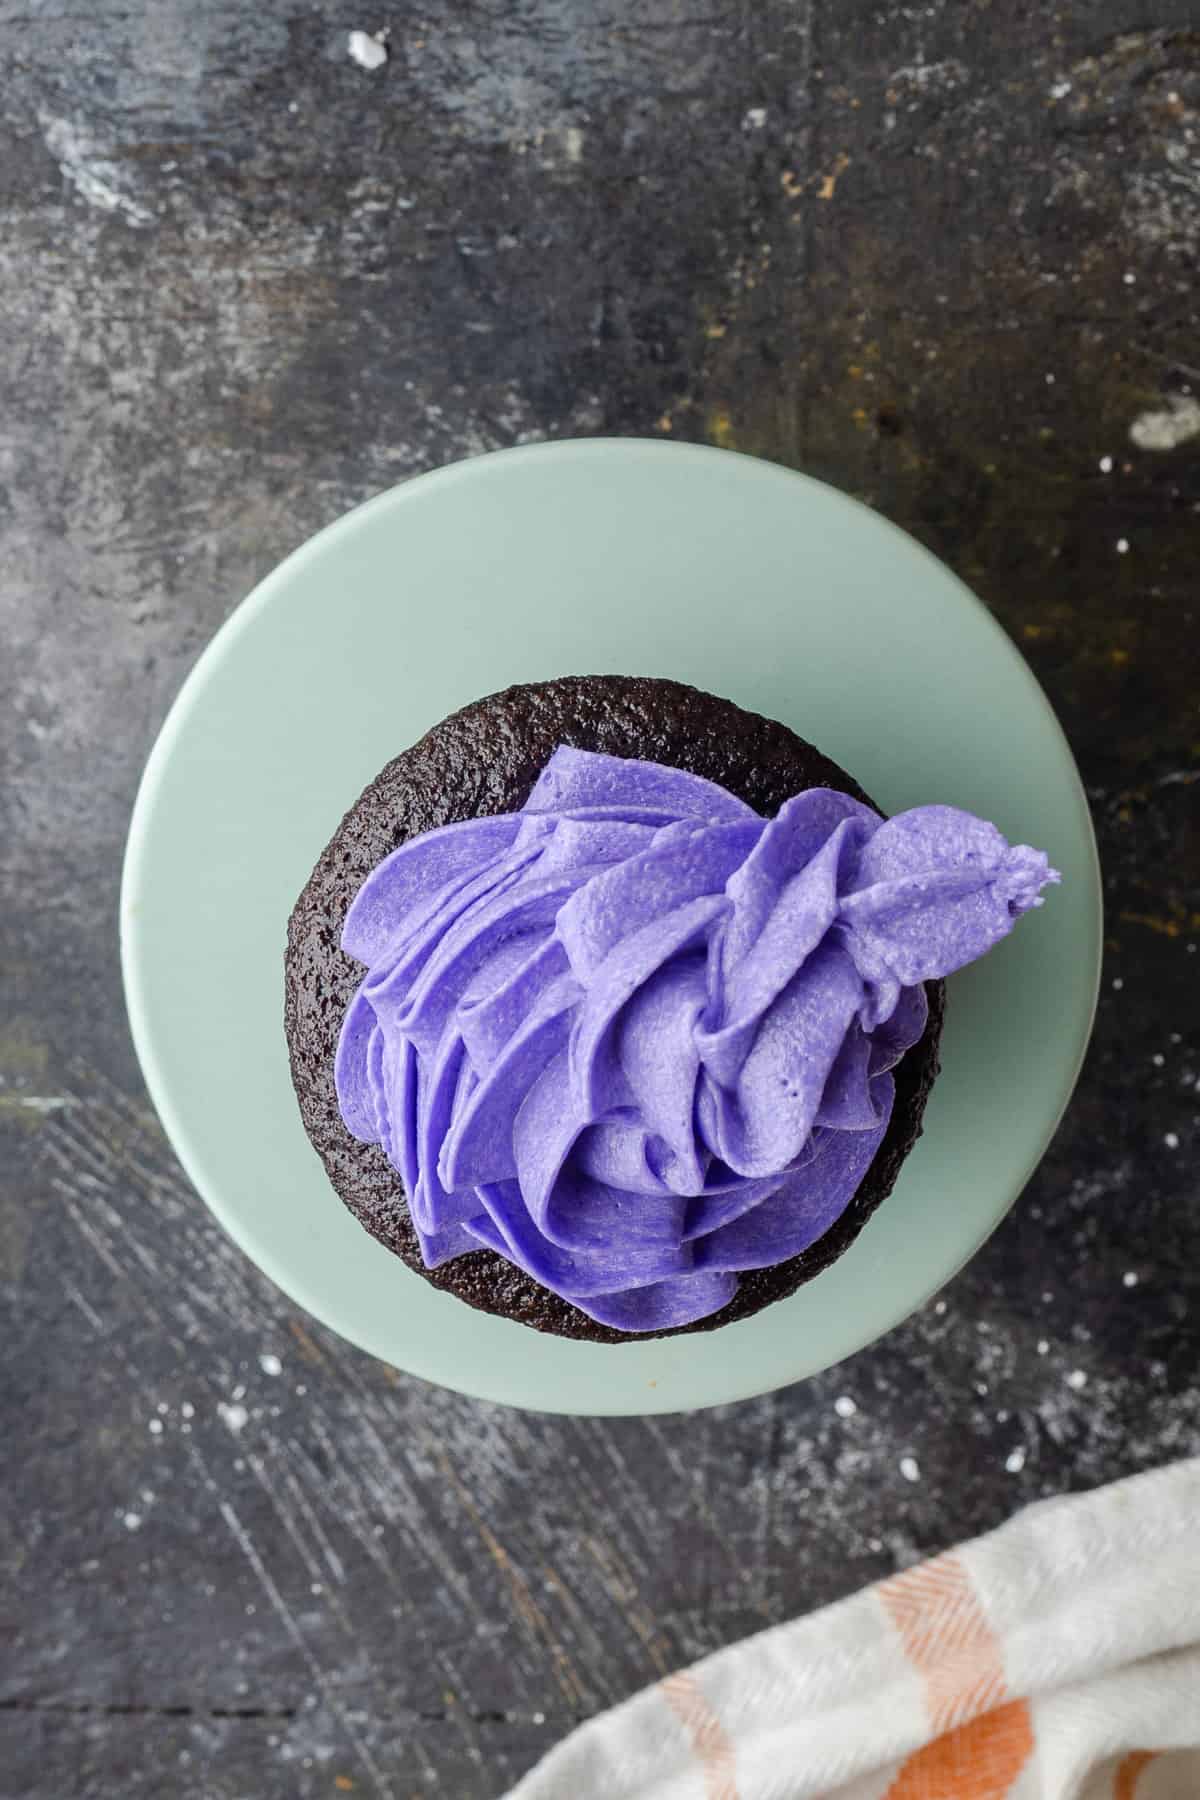 The finished purple cupcake frosting.